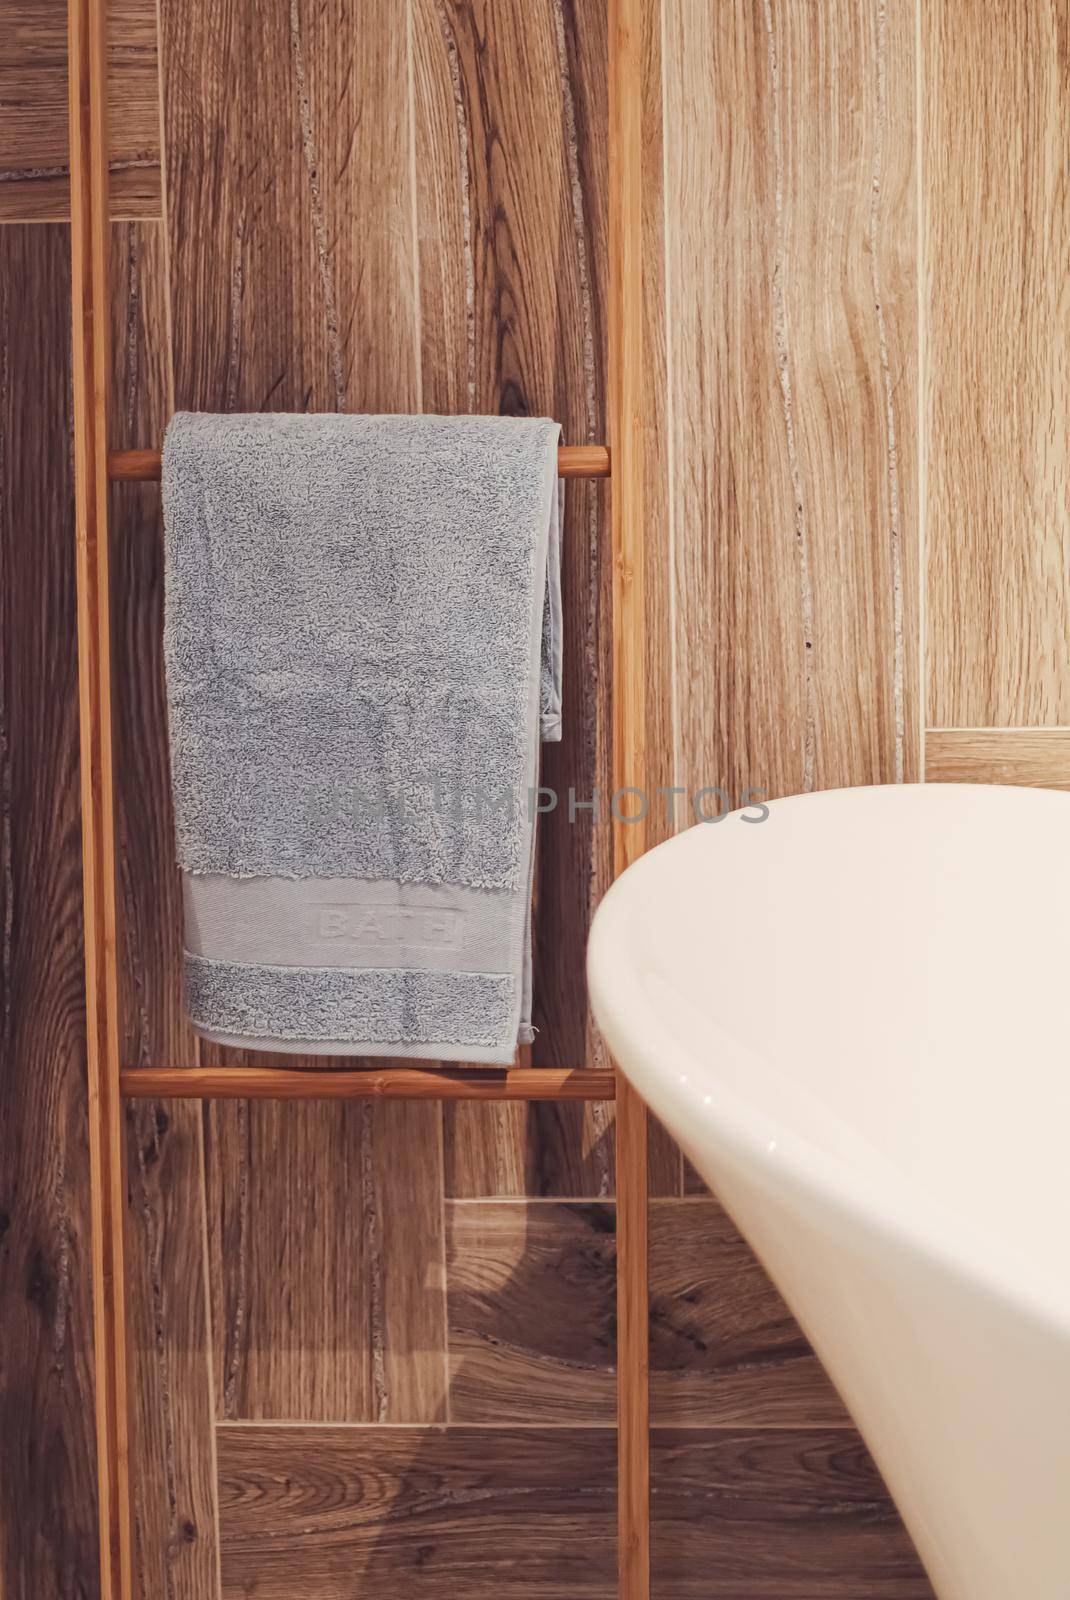 Organic and sustainable bath towel in an eco-friendly bathroom, home decor and luxury interior design concept